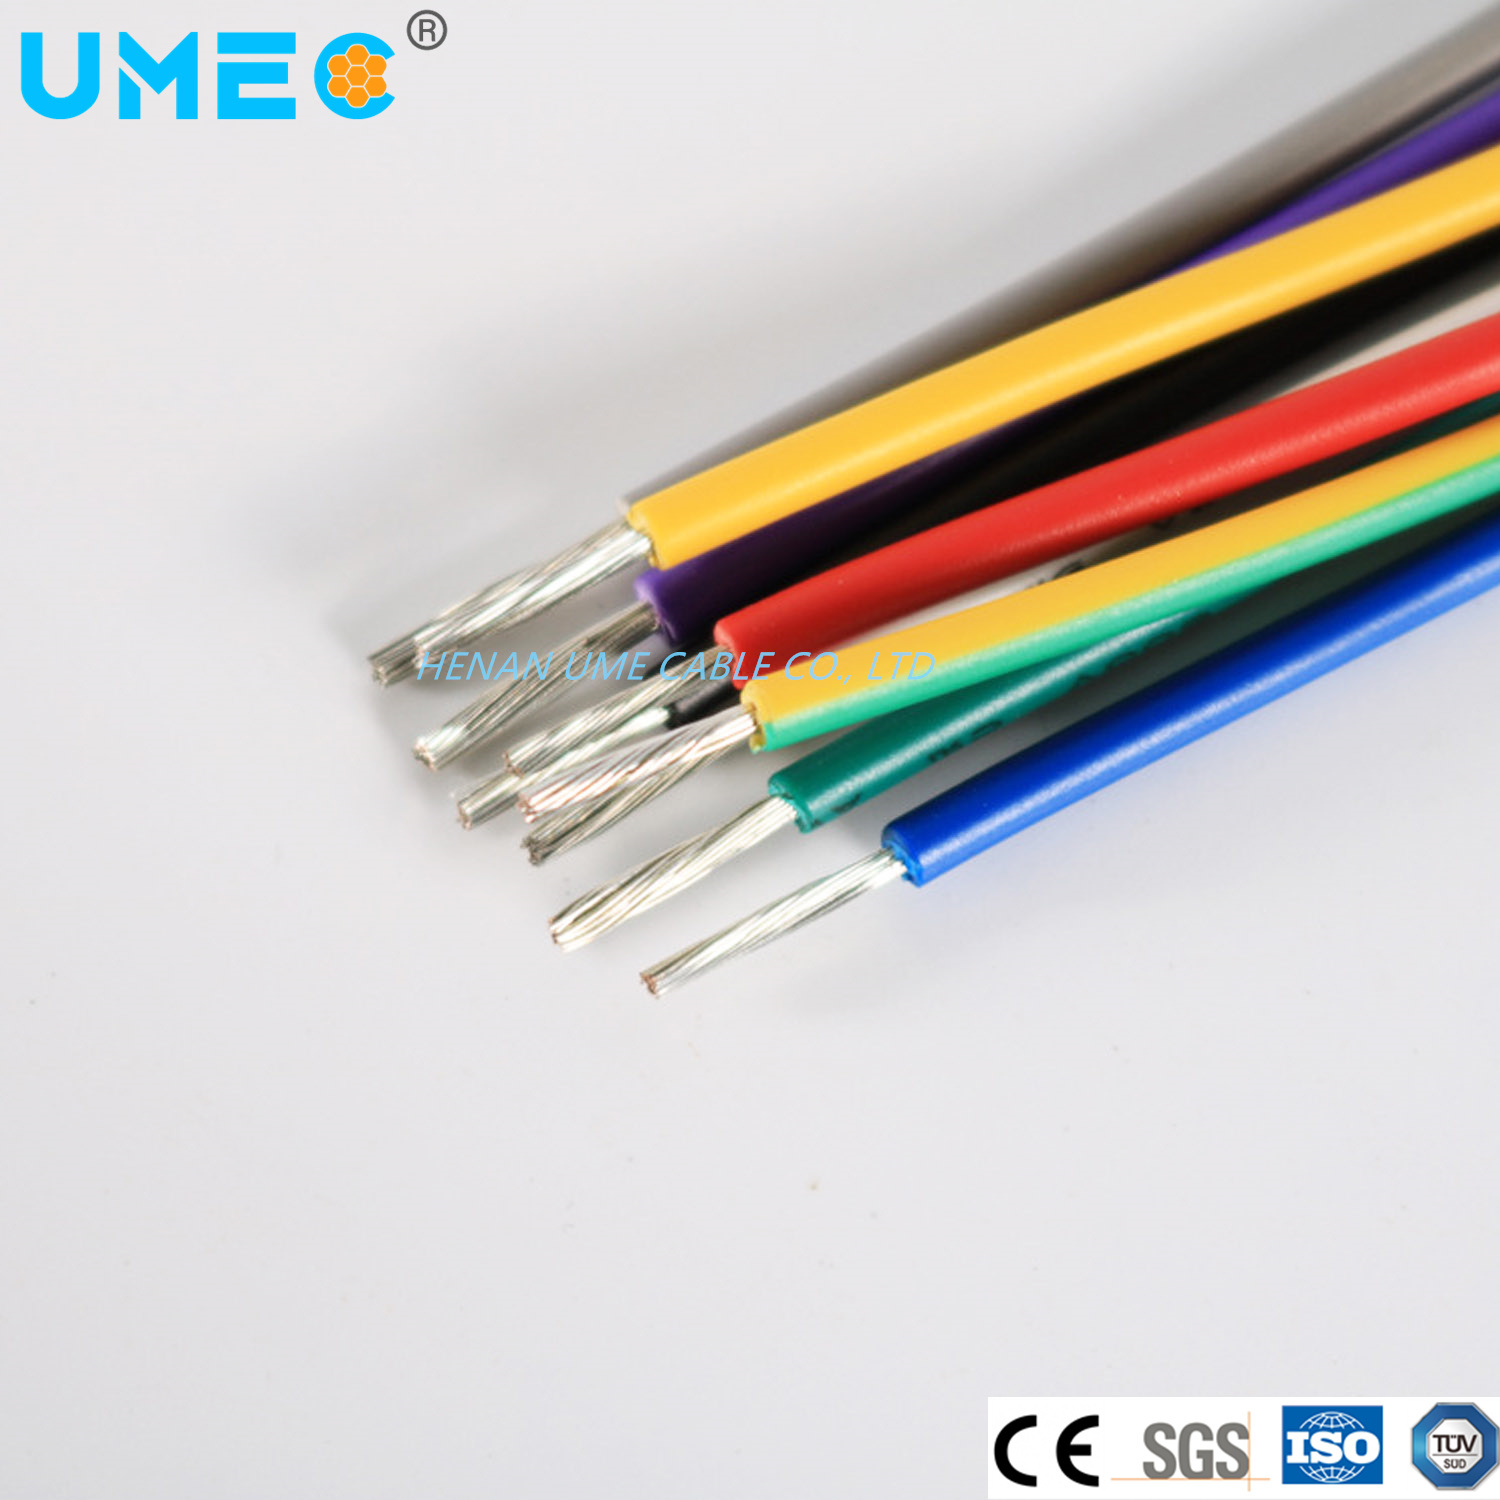 Electrictinned Copper Soft Heat Resistance Silicone Fiberglass Wire 0.3 0.5 0.75 1.0 1.5 2.0 2.5mm2 for Heating Parts Cable Wire